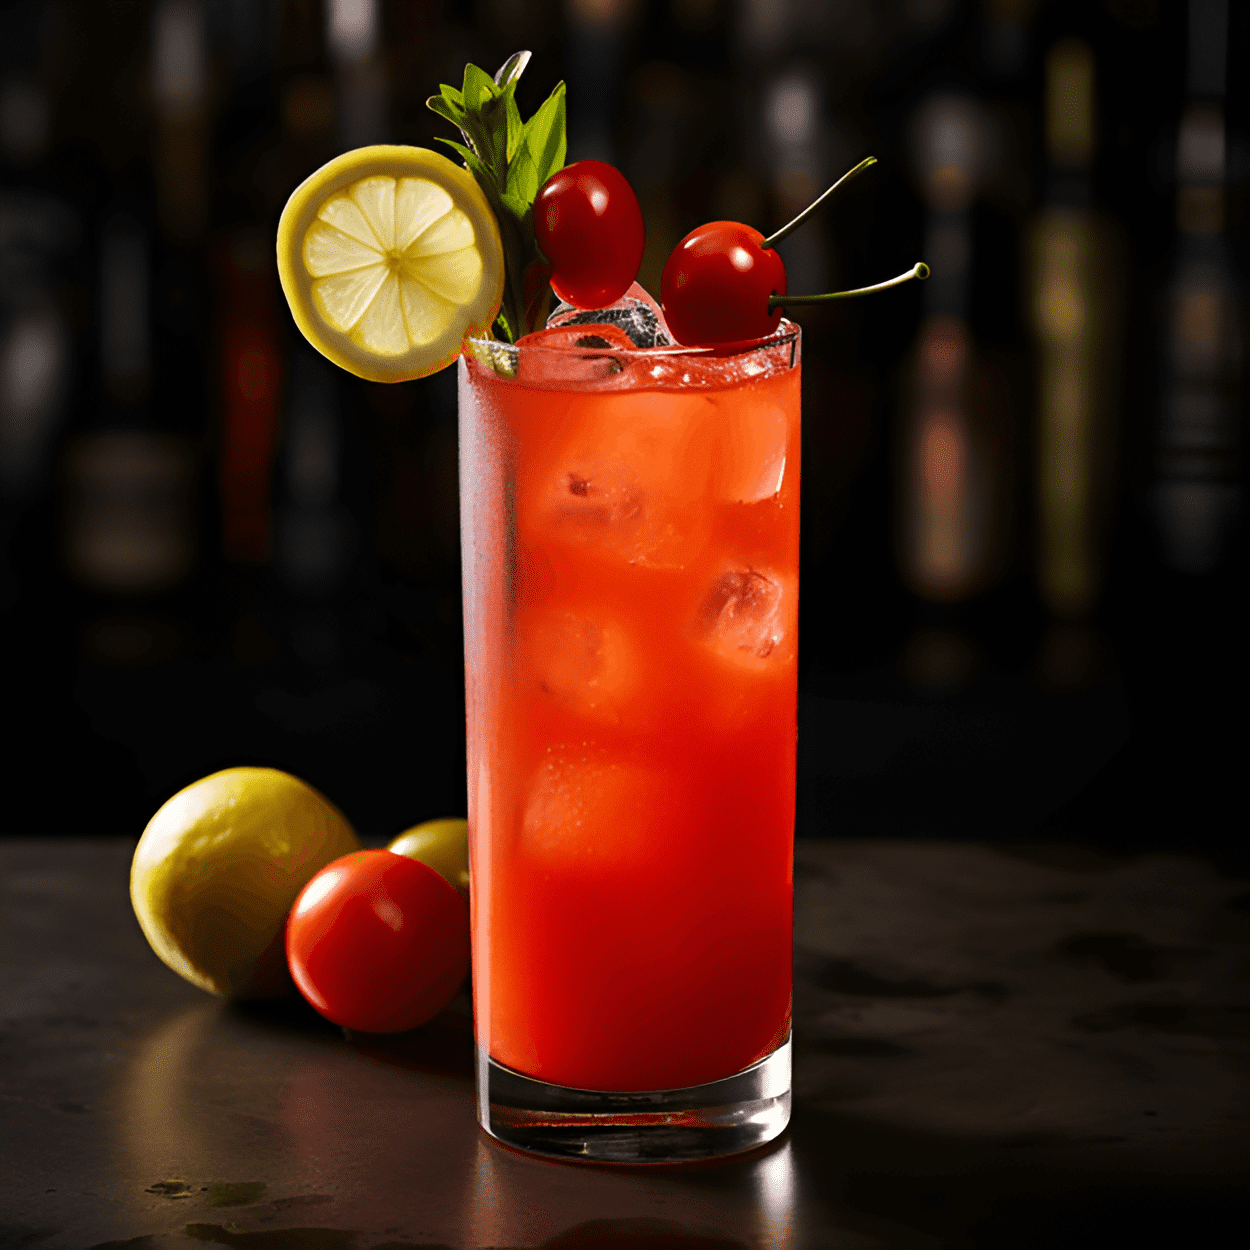 Mediterranean Mary Cocktail Recipe - The Mediterranean Mary is a savory and tangy cocktail with a hint of spiciness. The tomato juice provides a refreshing base, while the lemon juice and olives add a tangy kick. The vodka gives it a strong, robust flavor, and the Worcestershire sauce and Tabasco add a spicy depth to the cocktail.